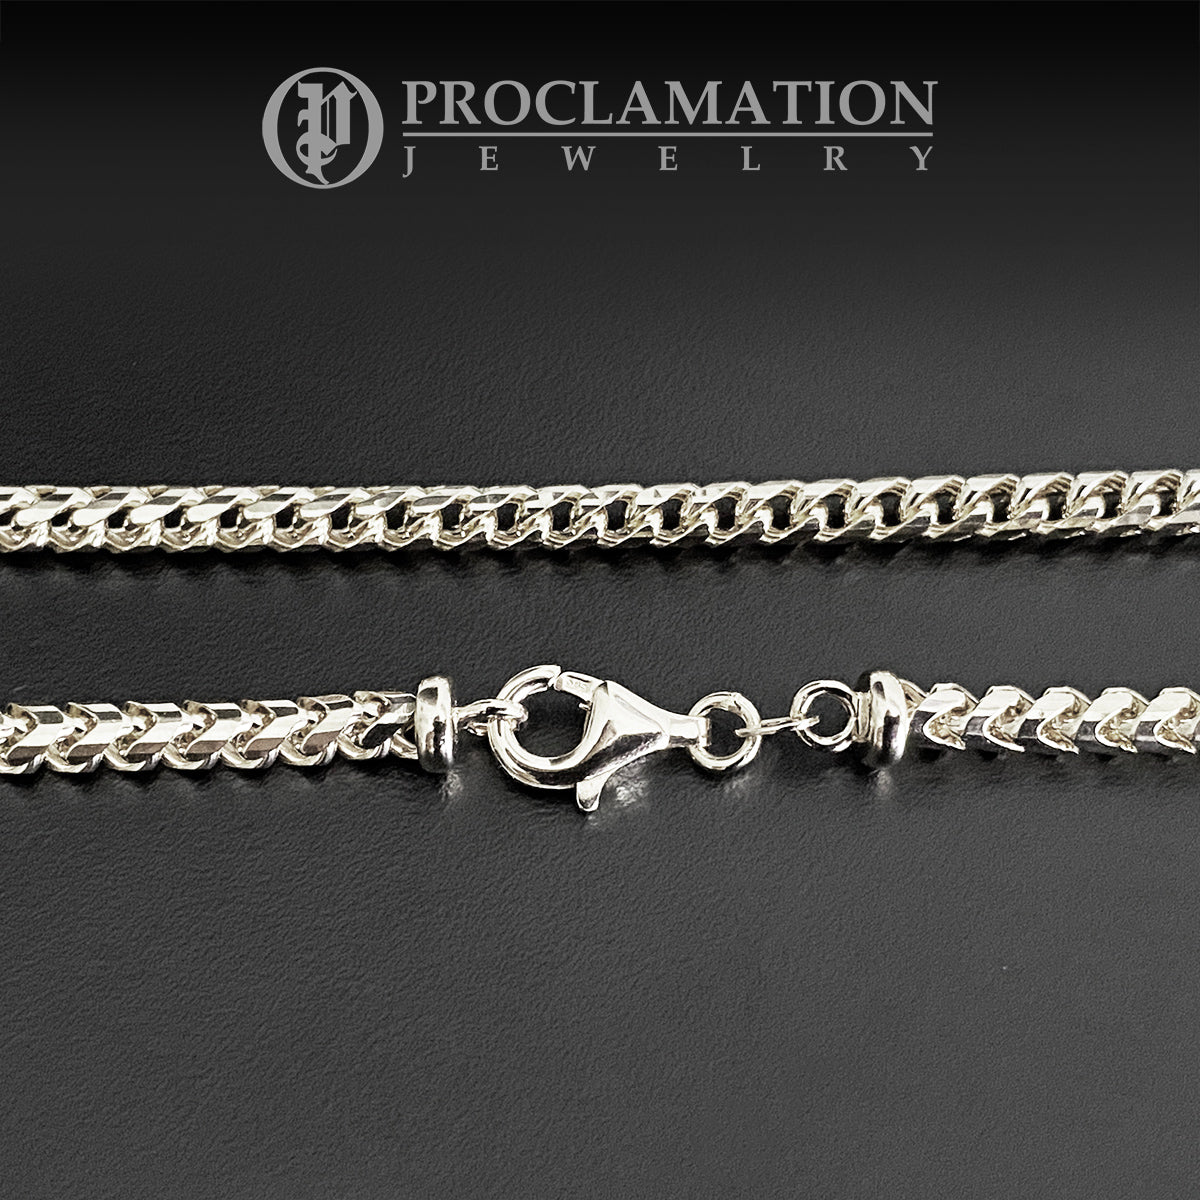 4mm Diamond Cut Rope Chain, 14K Yellow Gold, Proclamation Jewelry 26 / Luxury Lobster Clasp